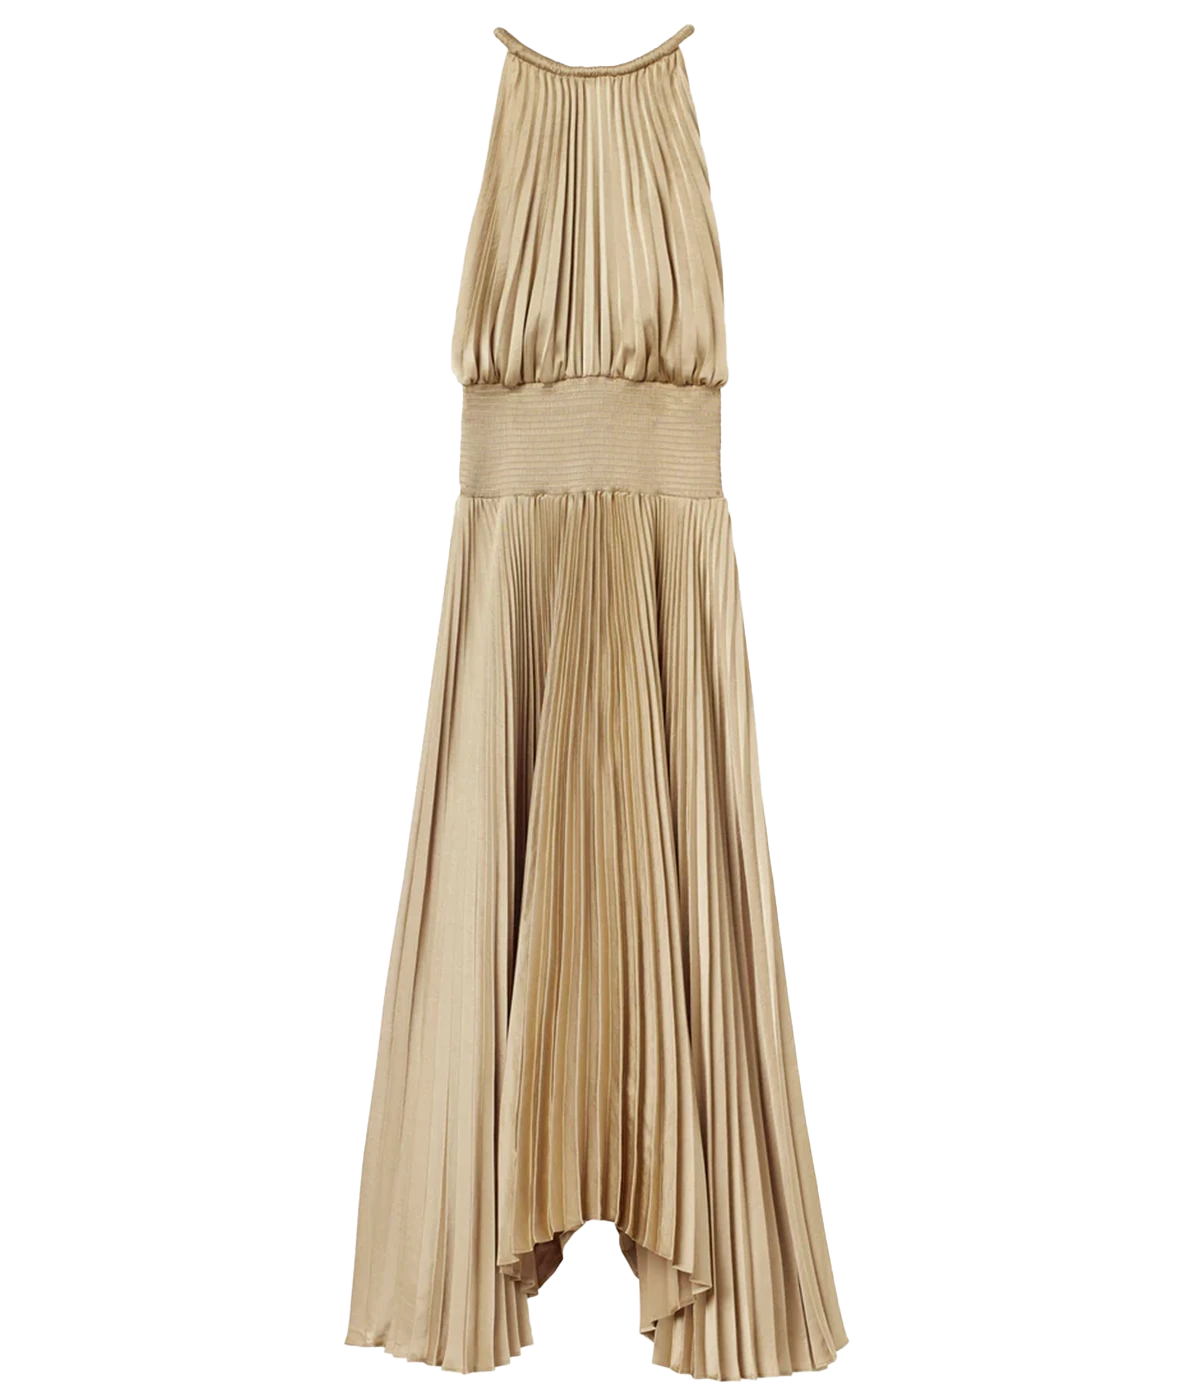 Image of a halter neck style midi dress in a sage green colourway. Featuring a pleated asymmetric hemline, smocked waist and button neck detailing. 